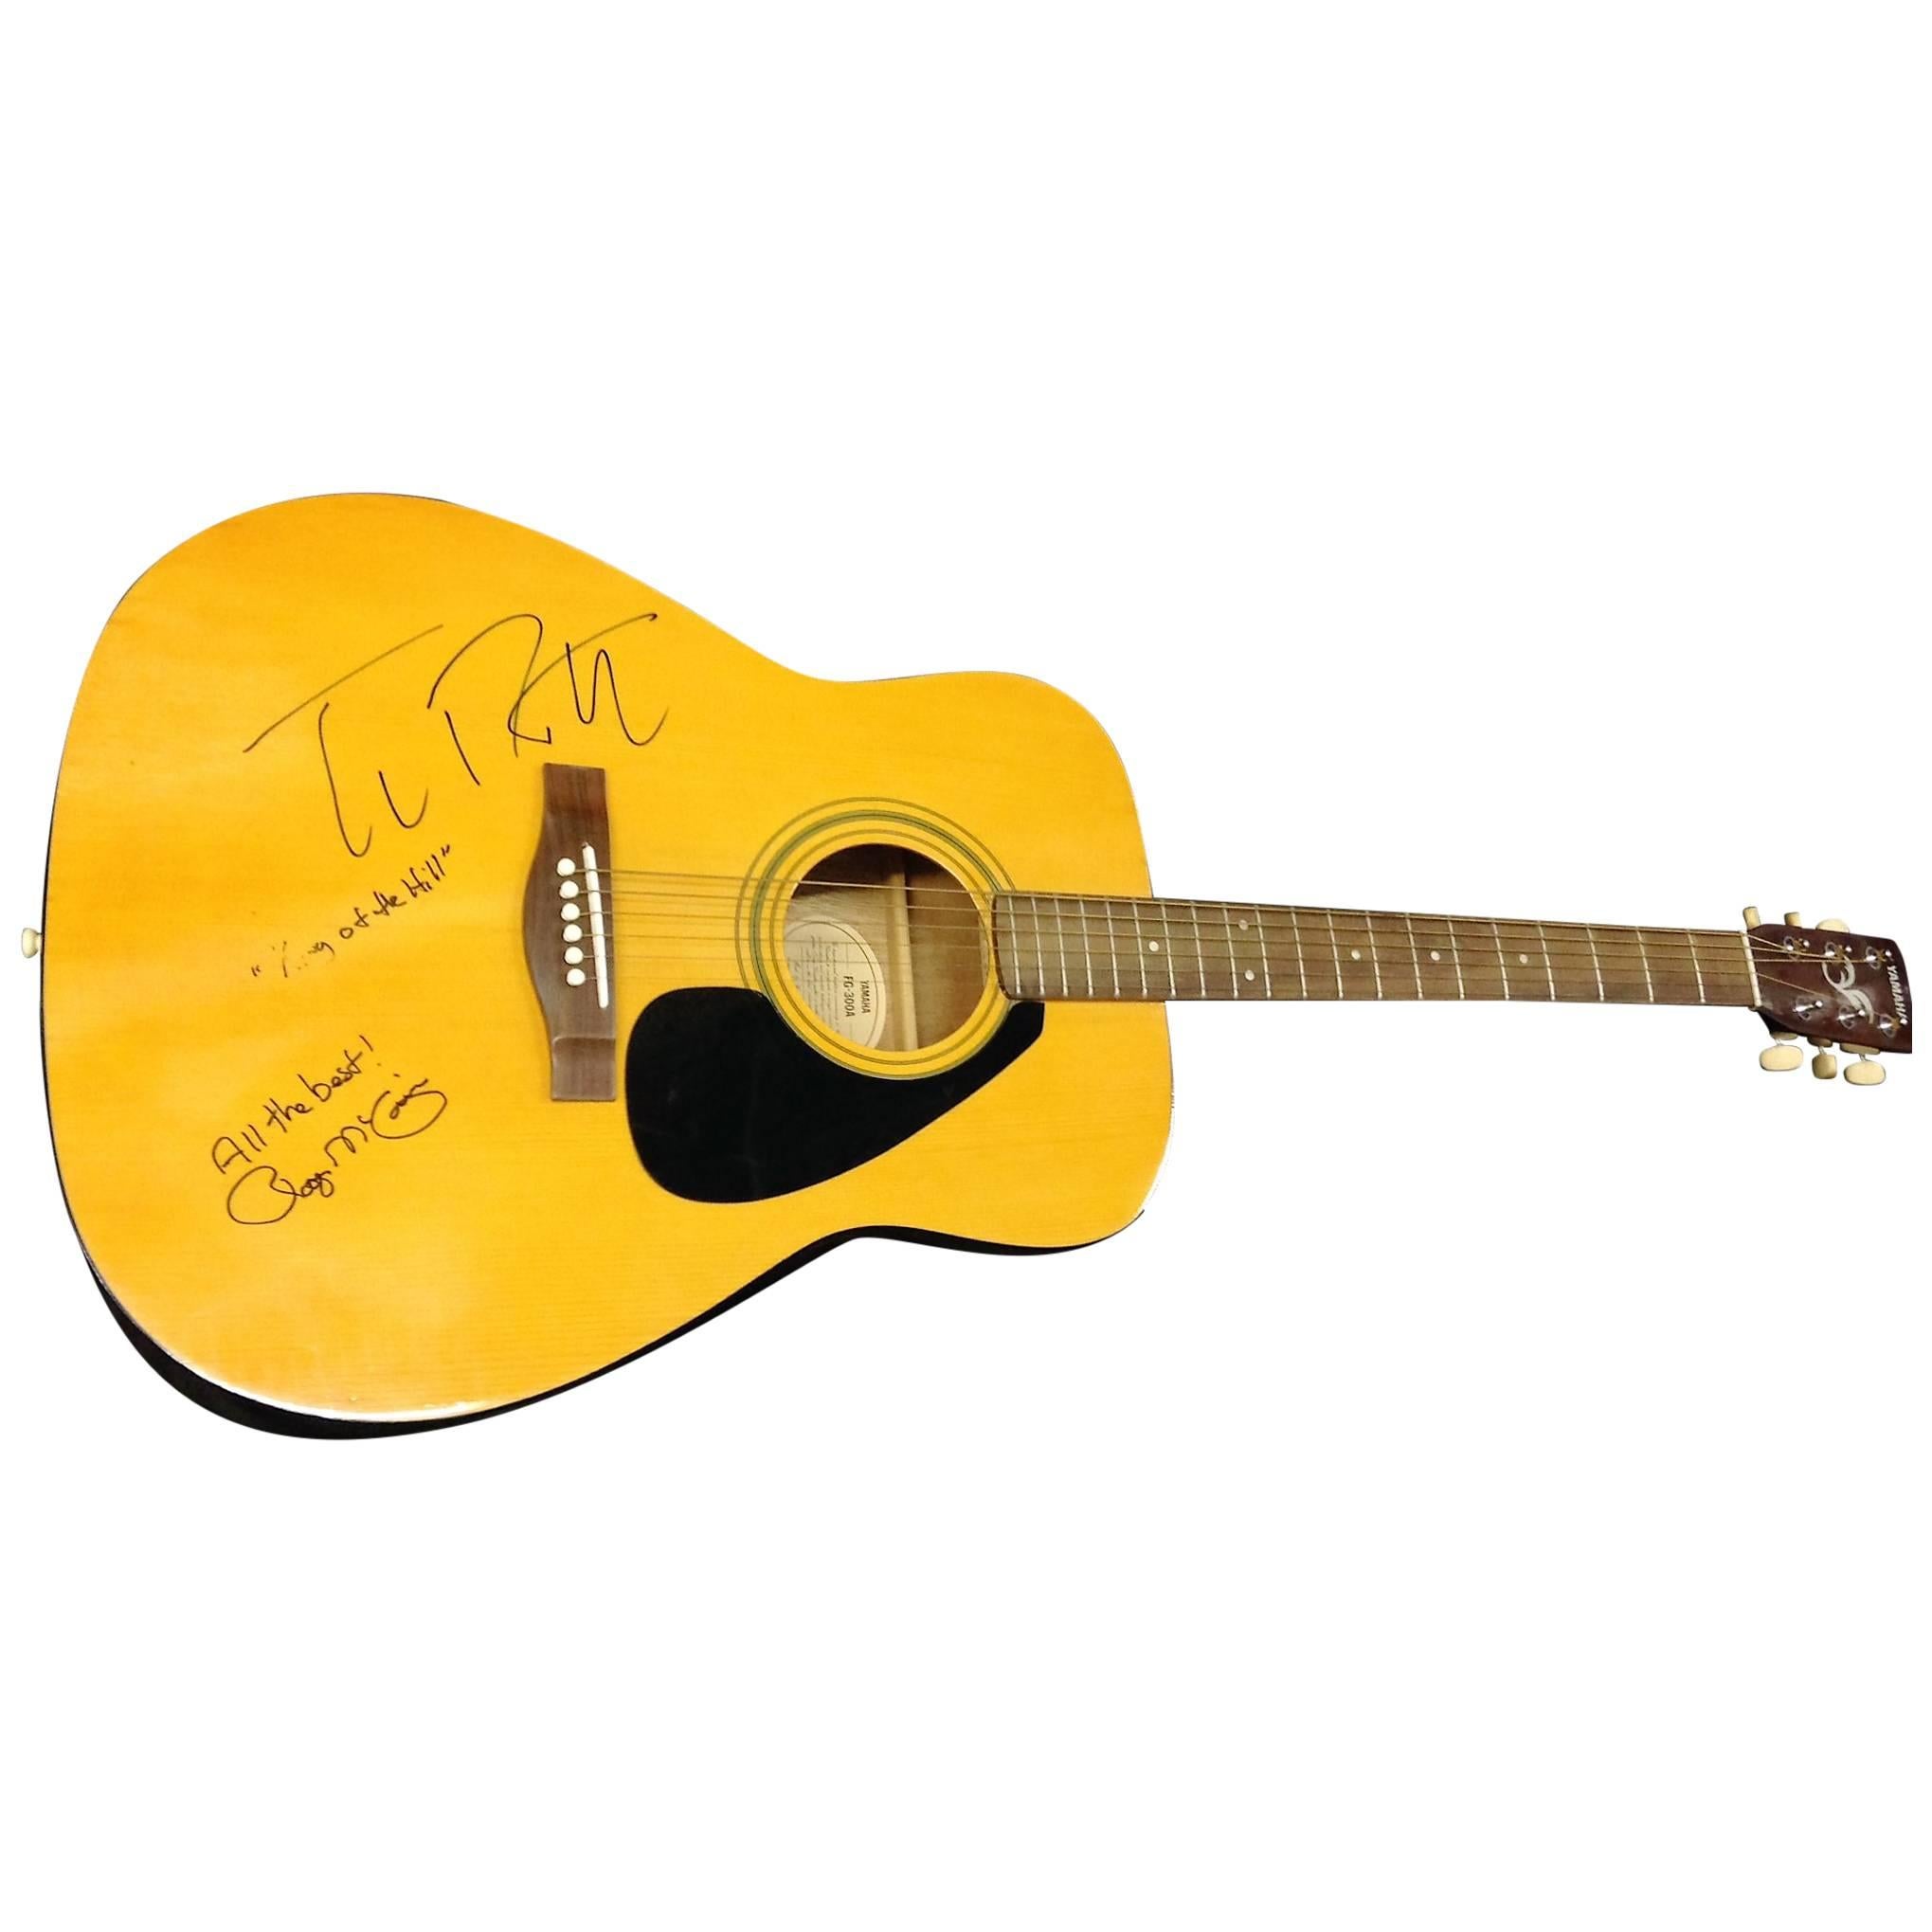 Tom Petty and Roger McGuinn Autographed Guitar For Sale